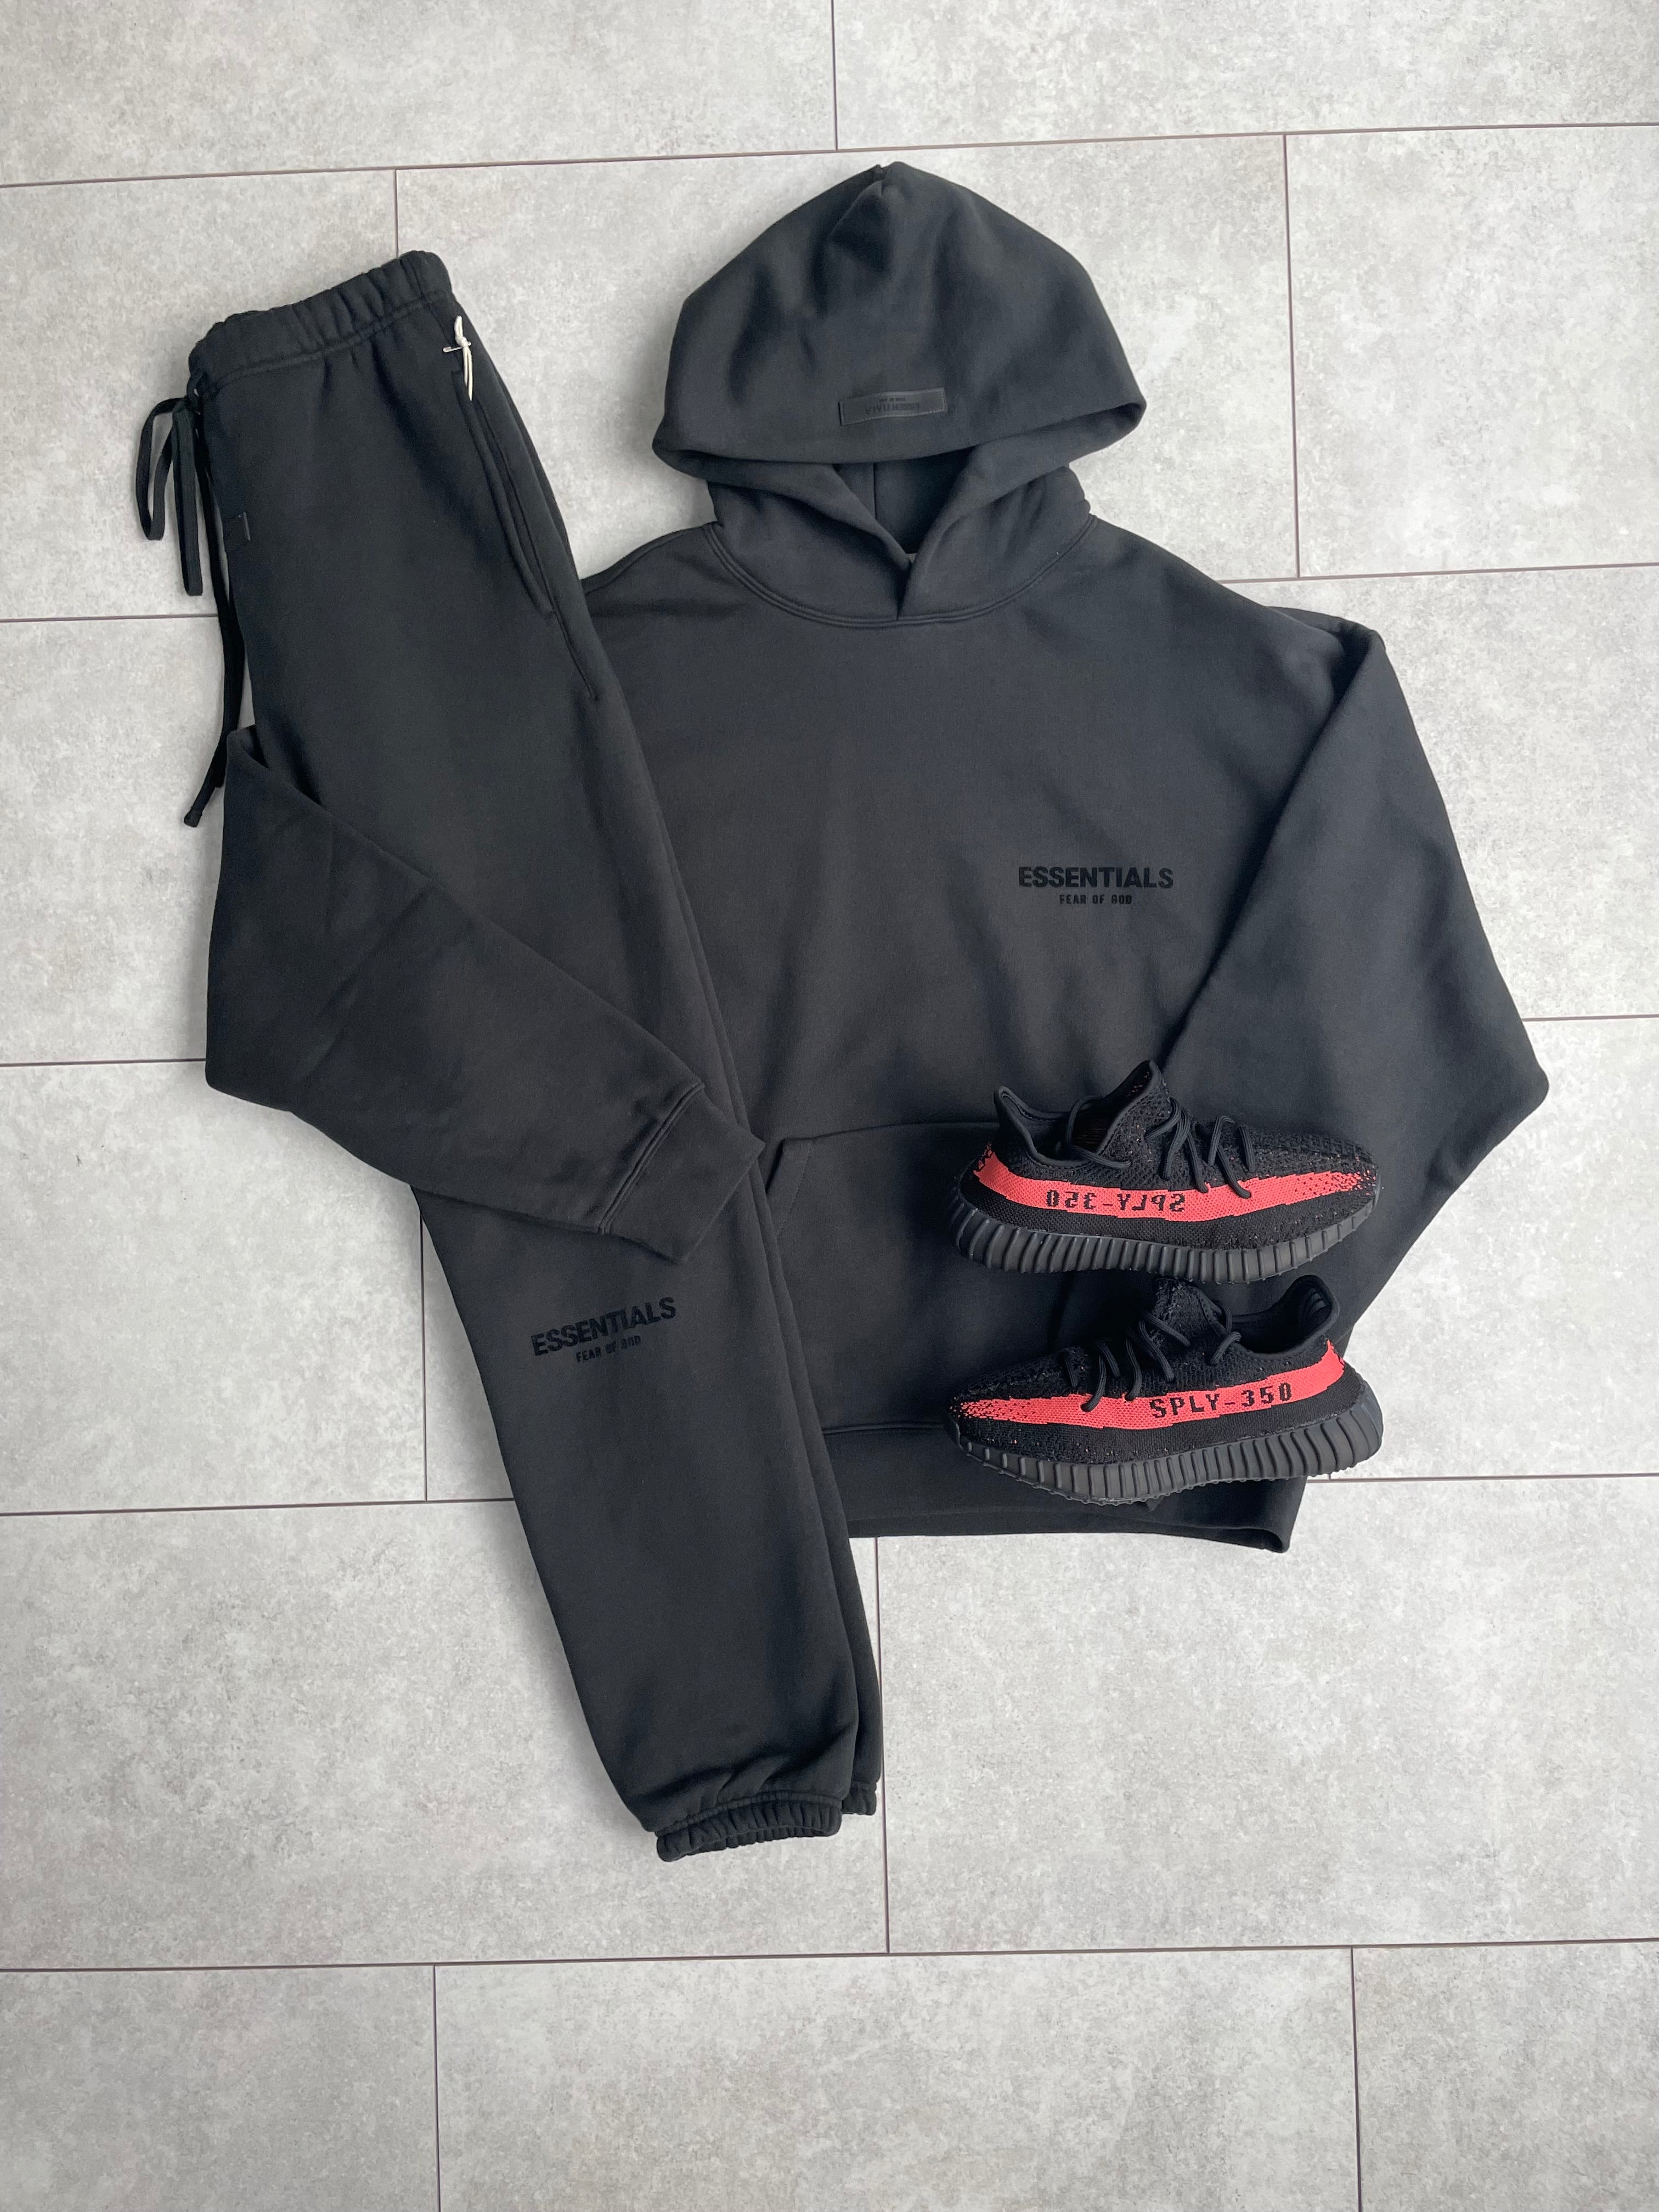 Fear of God Essentials Black Tracksuit (SS22)